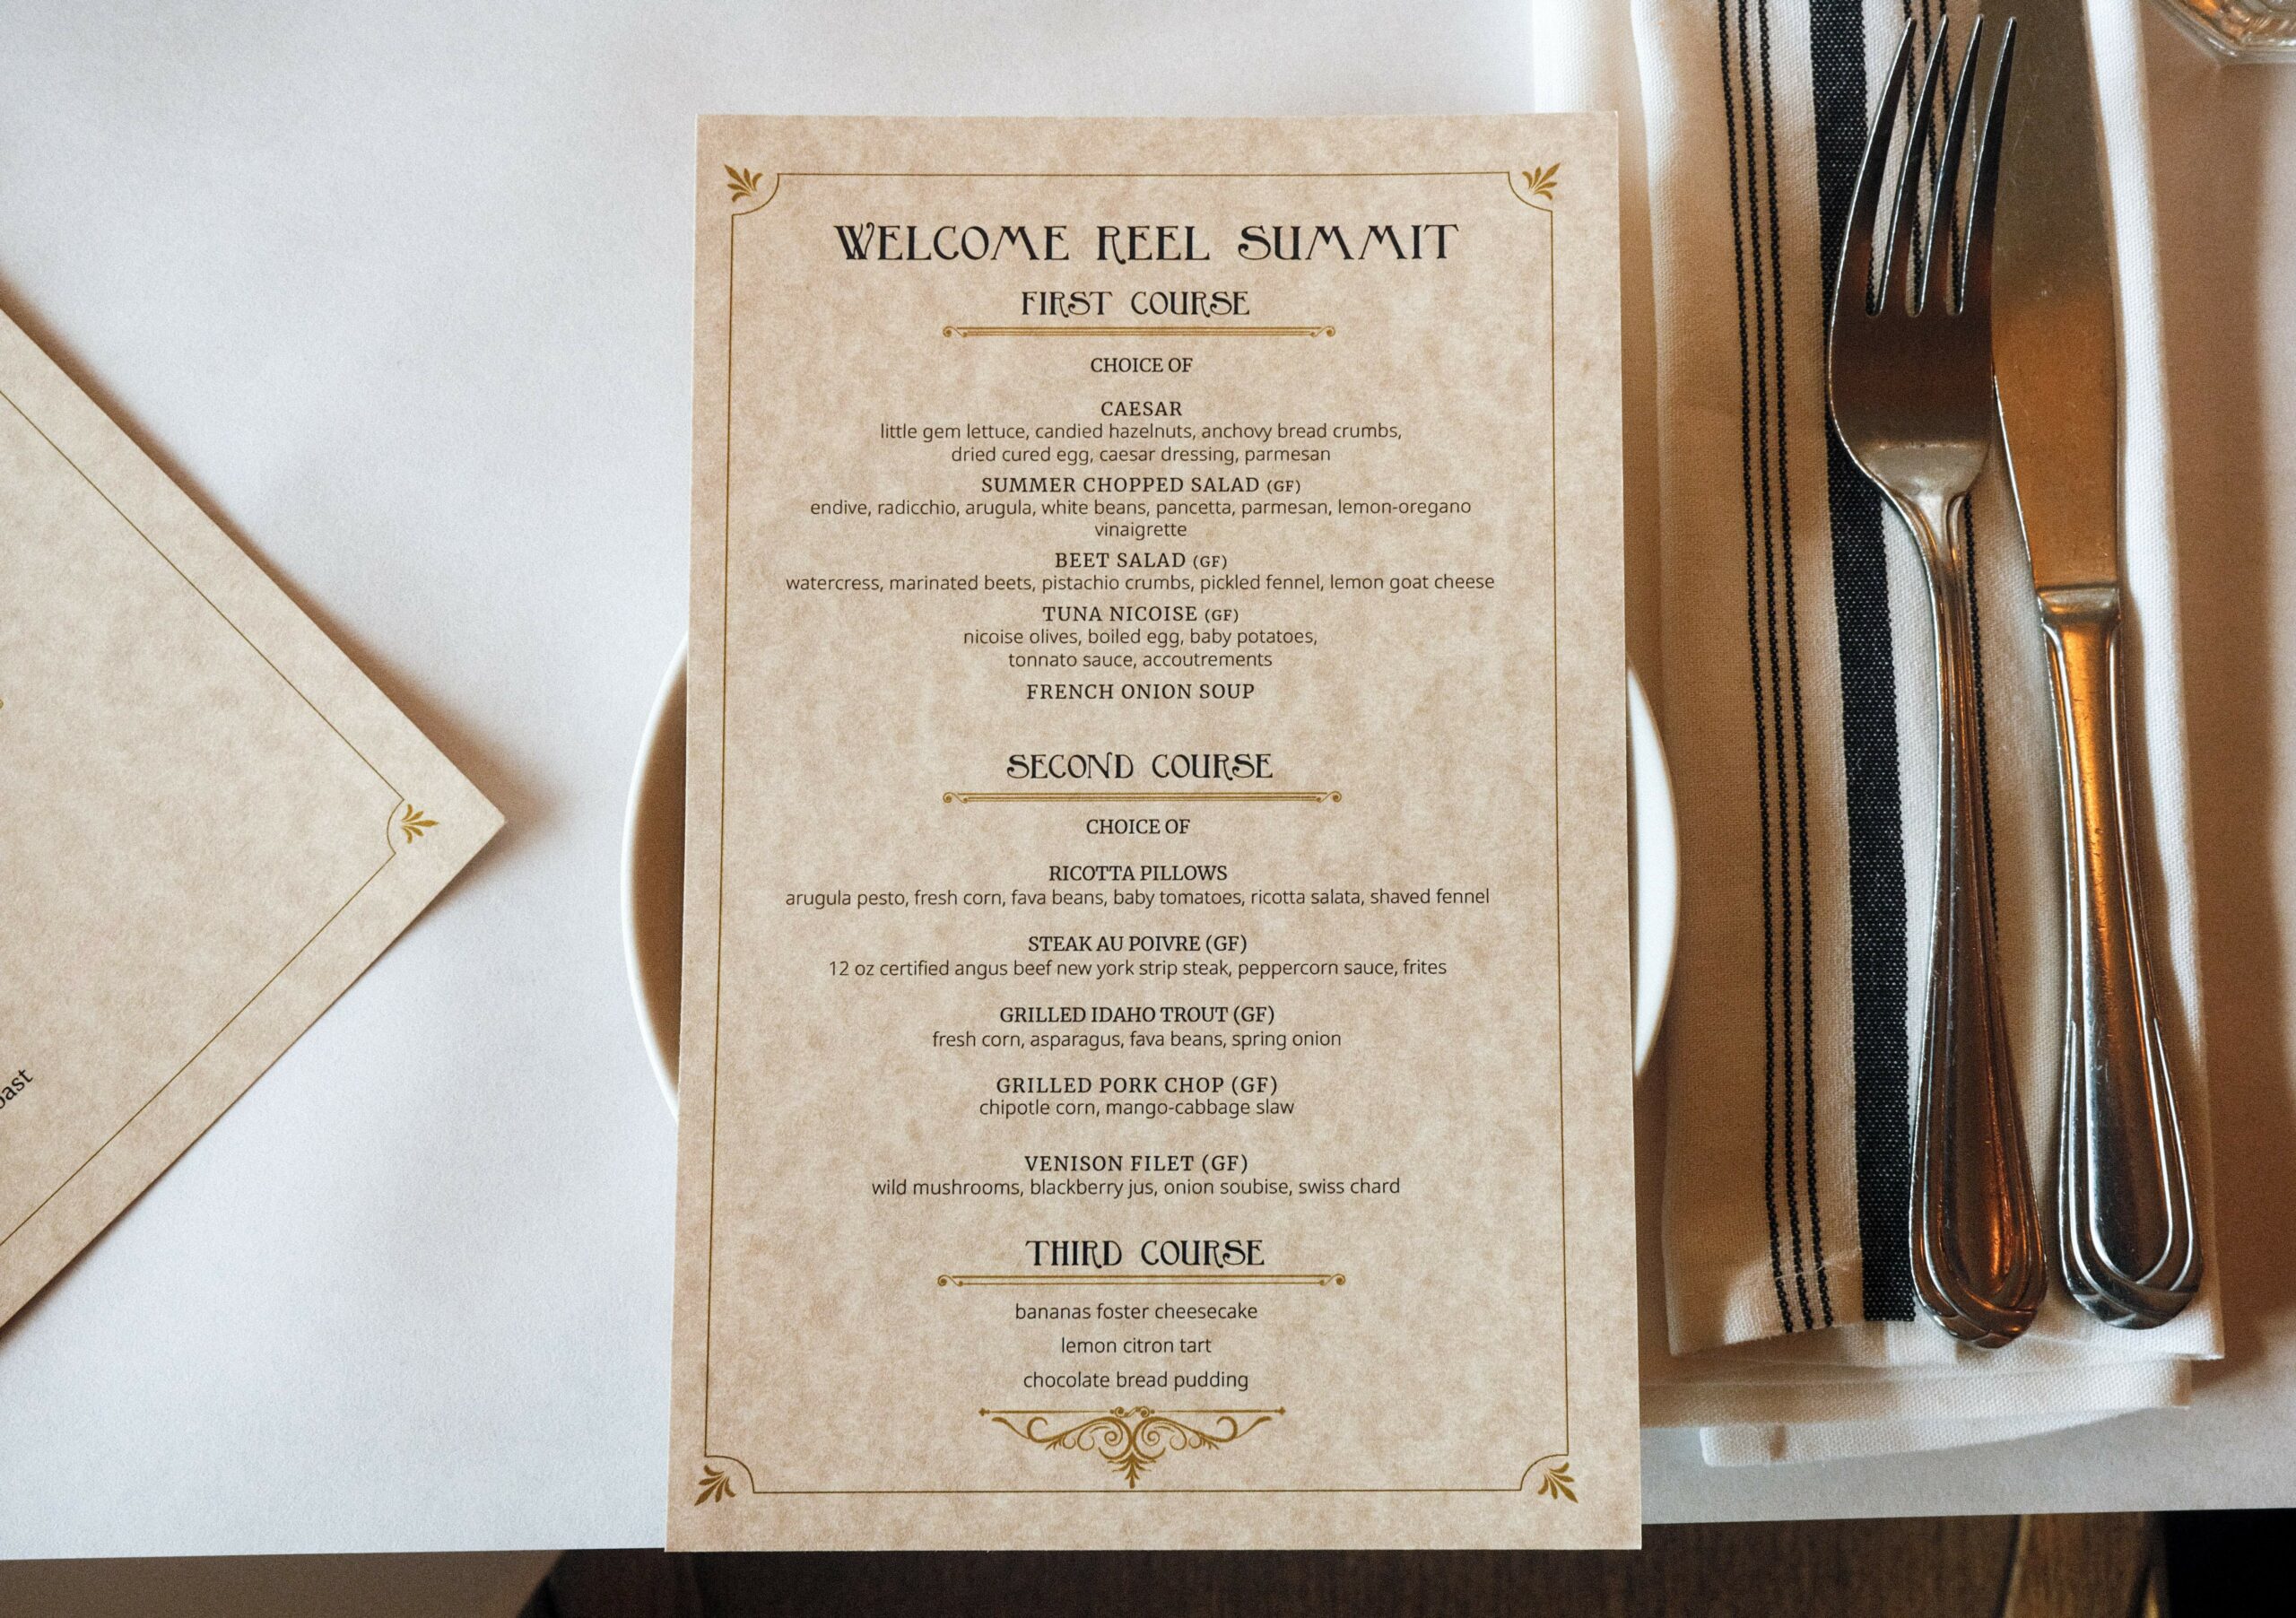 Elegantly designed menu card placed on the plate enhances the table setting appeal.